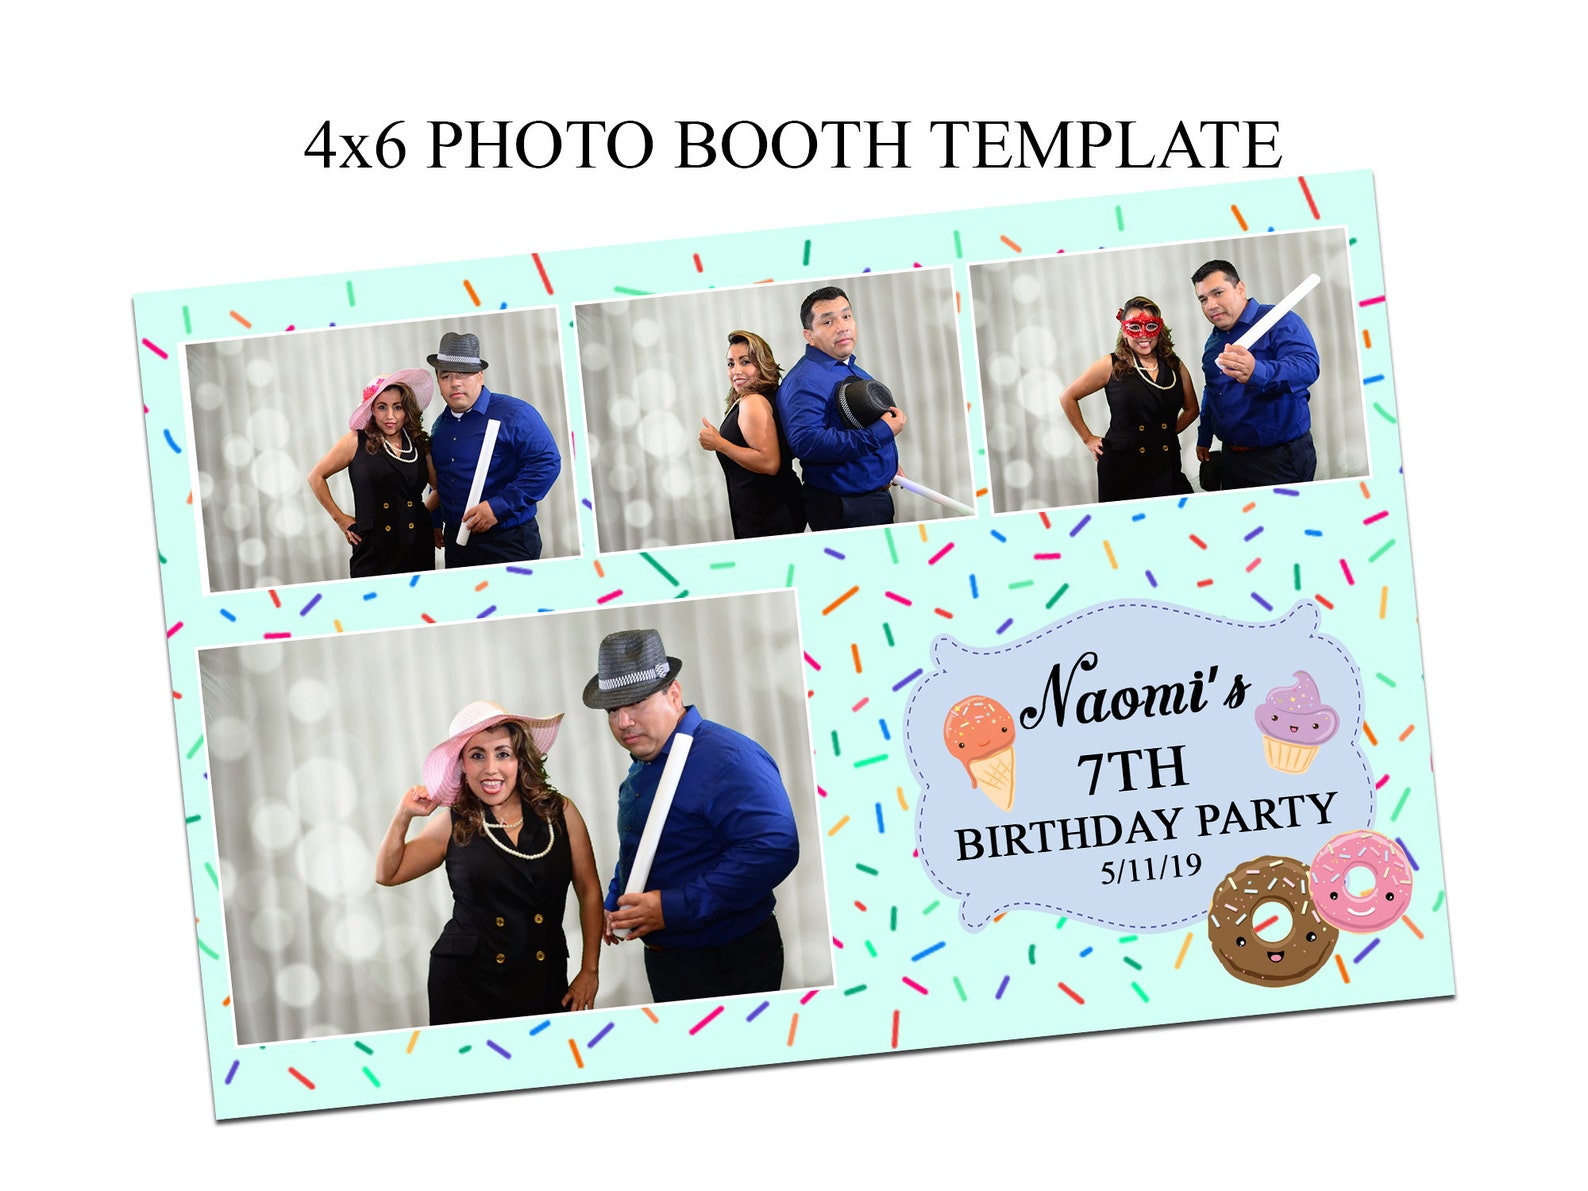 4x6 Photo Booth Template